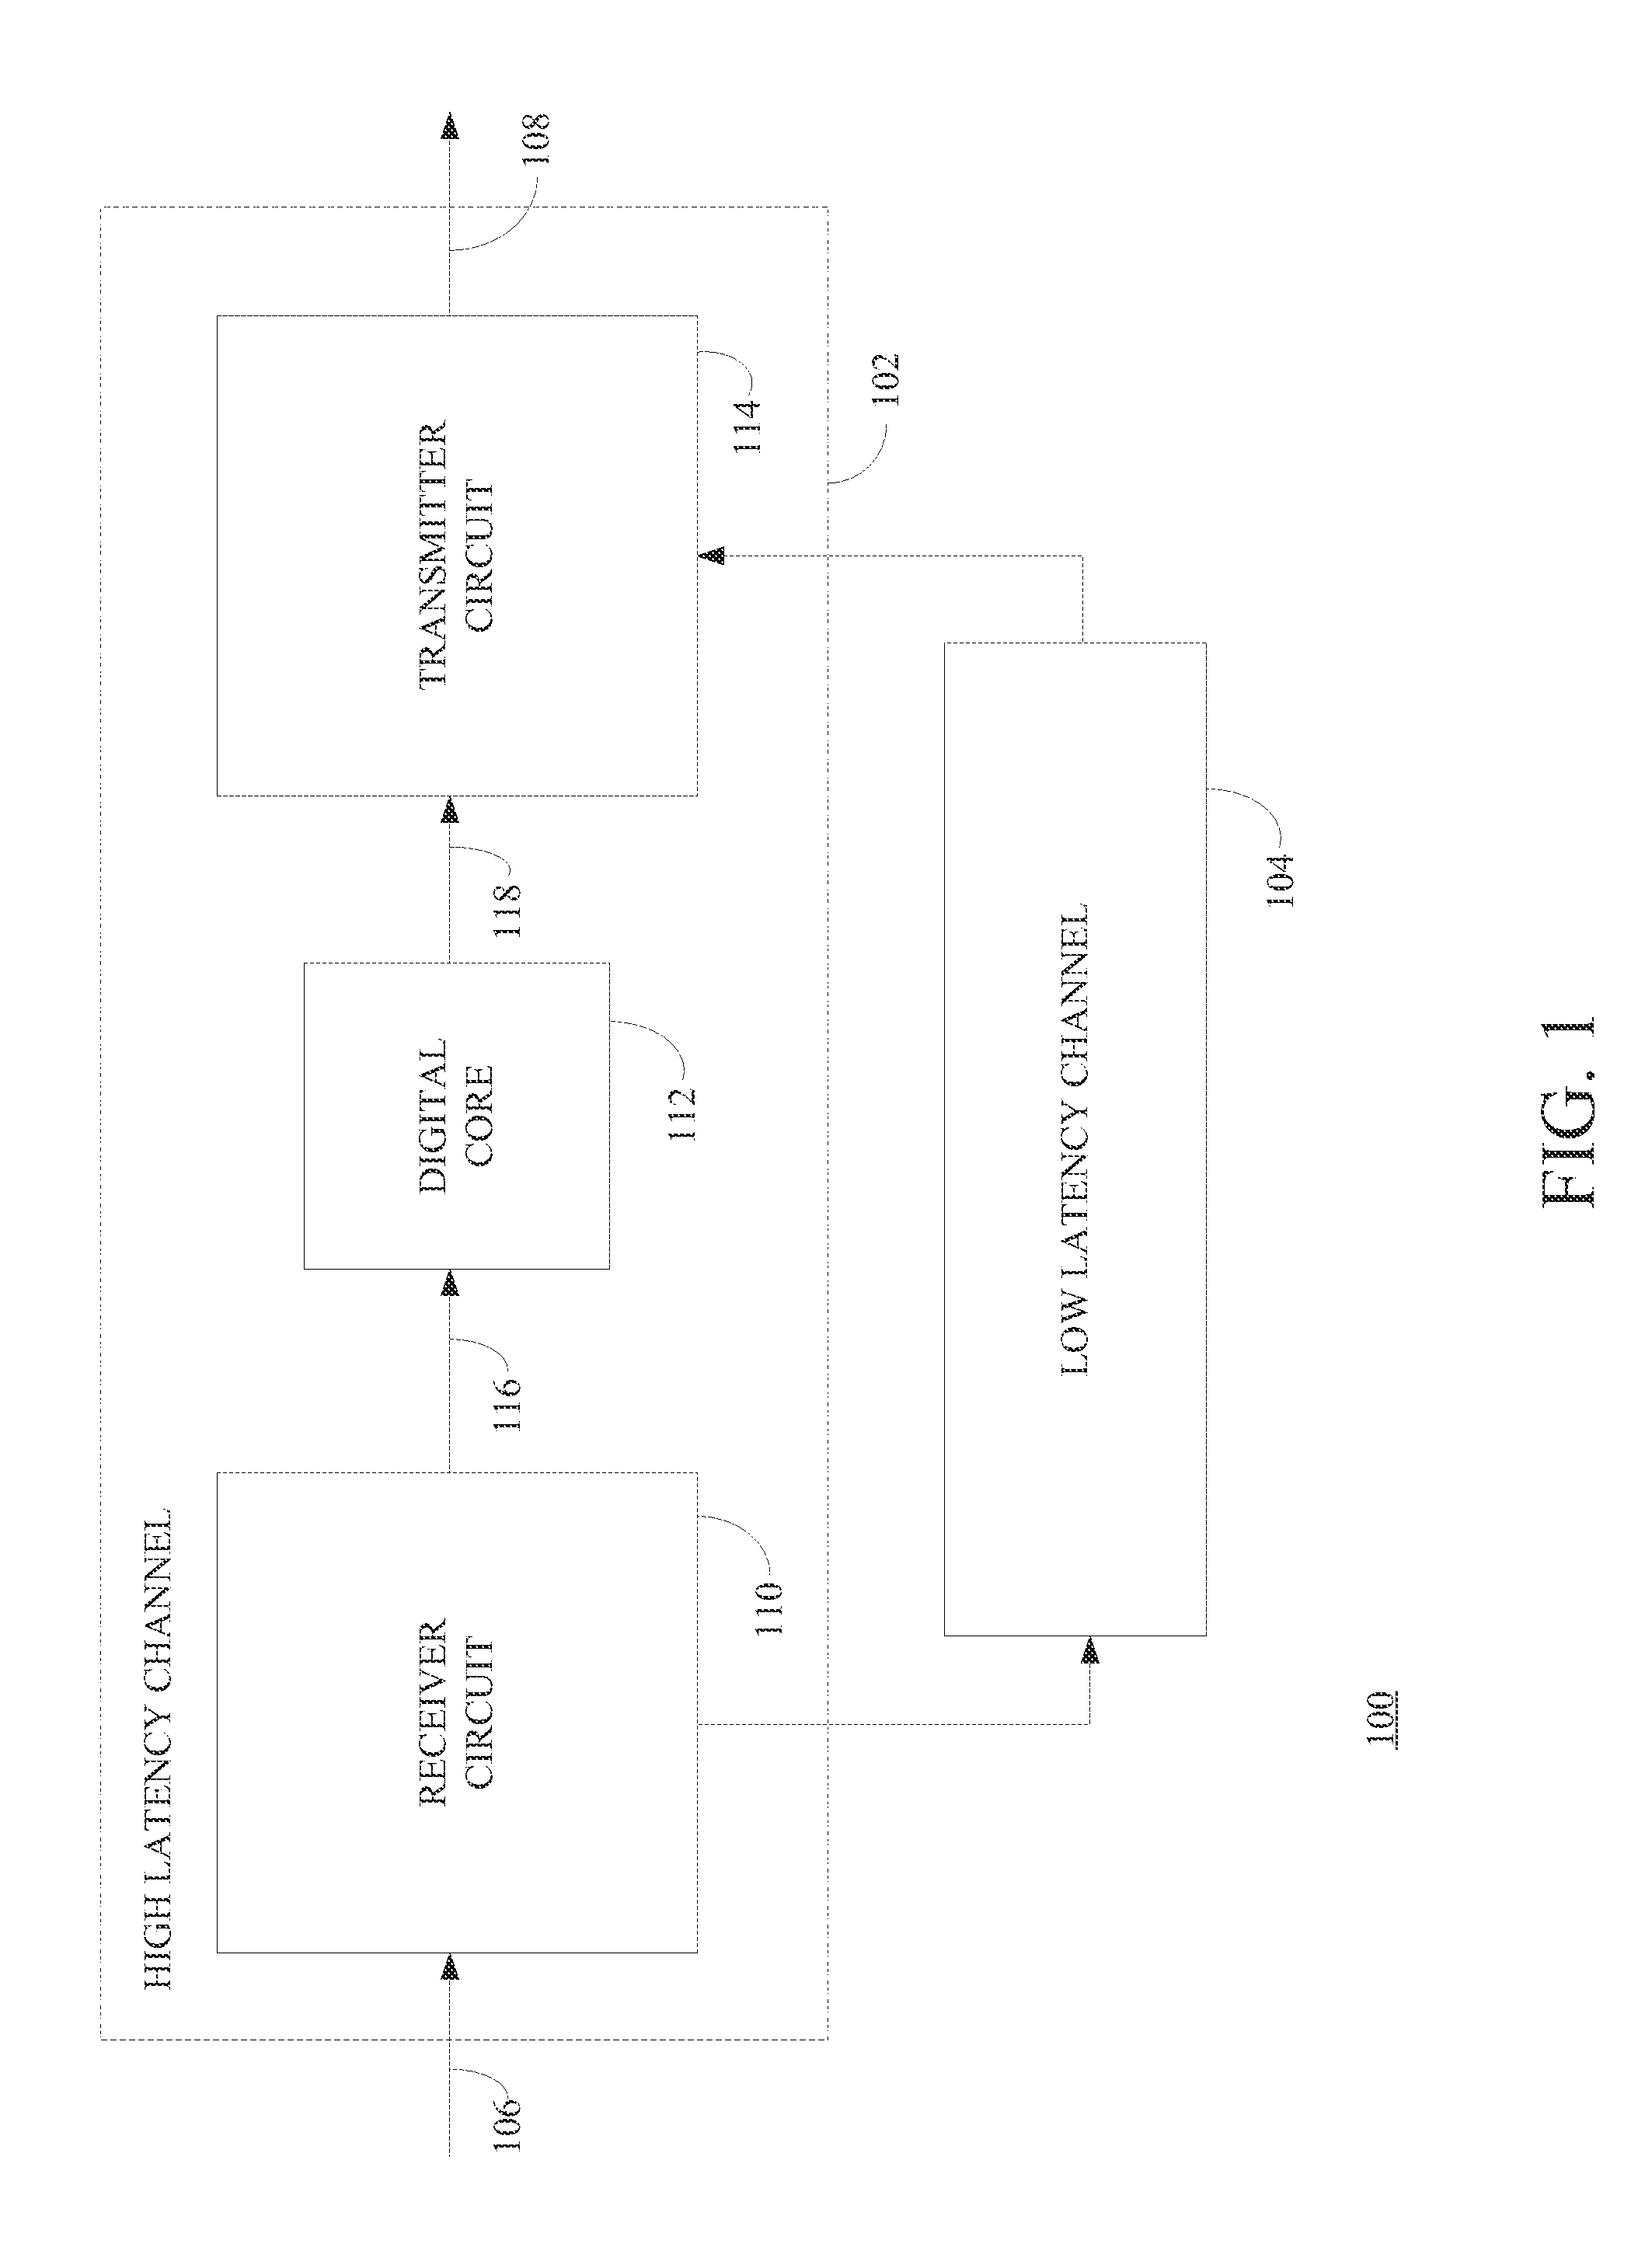 Transceiver including a high latency communication channel and a low latency communication channel